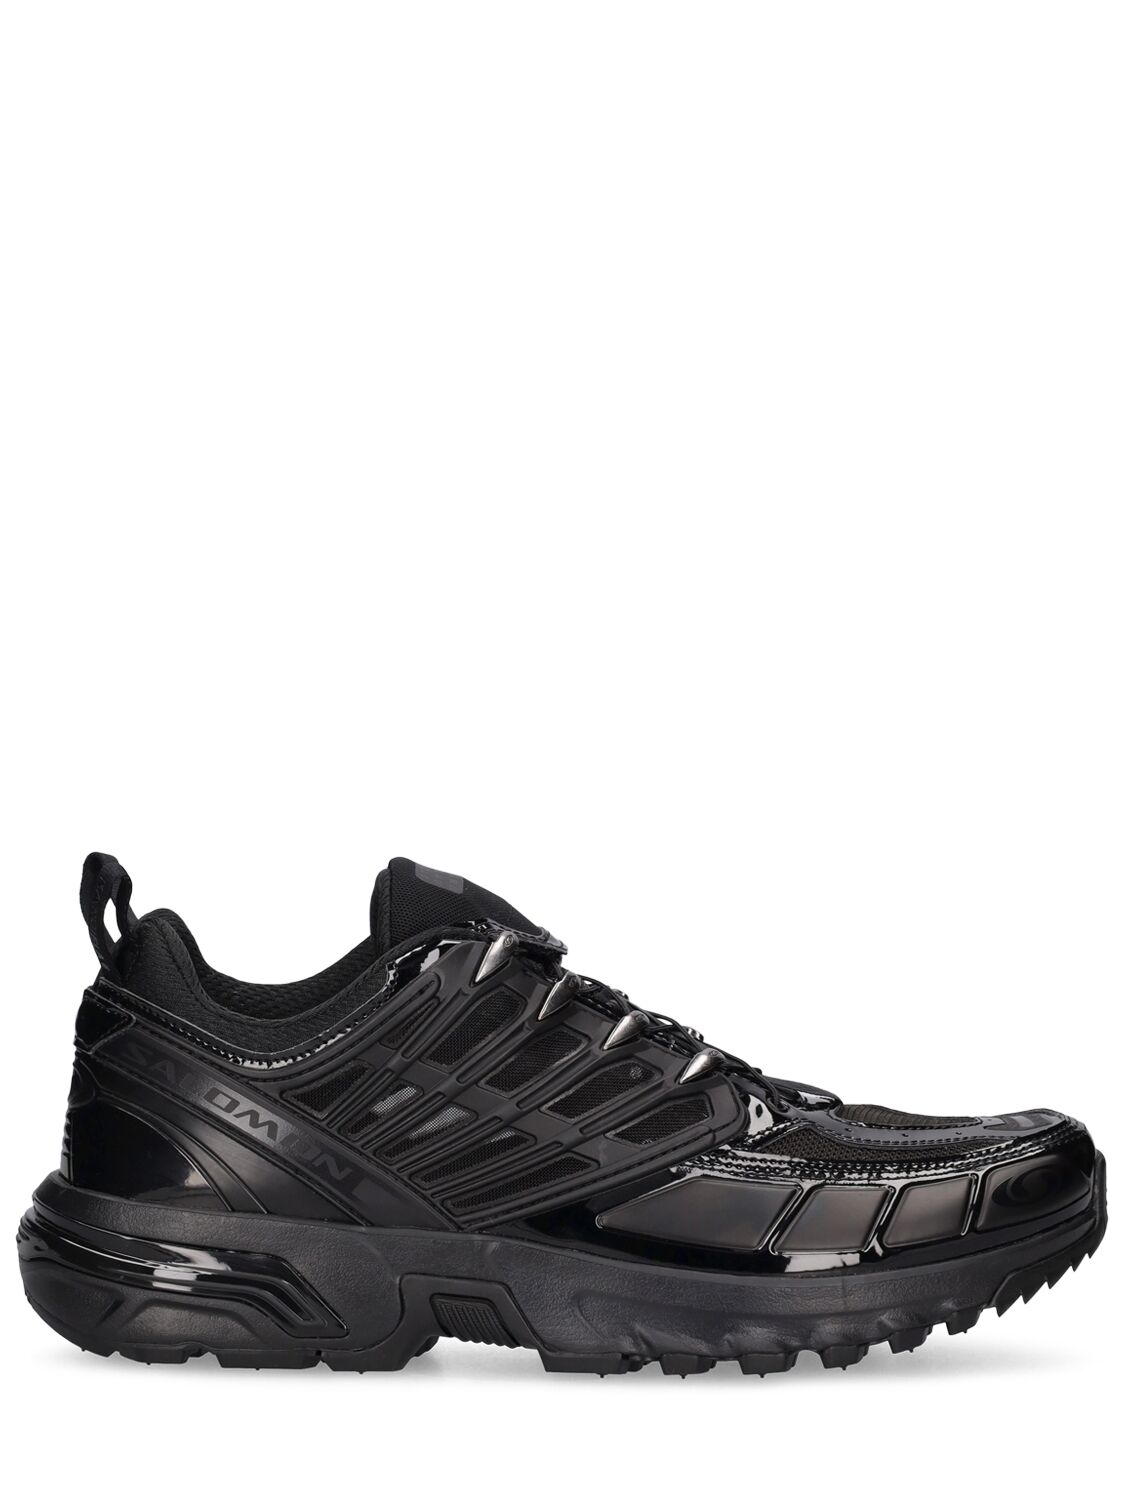 Mm6 Maison Margiela Acs Pro Colourblock Caged Runner Trainers In Veryblack